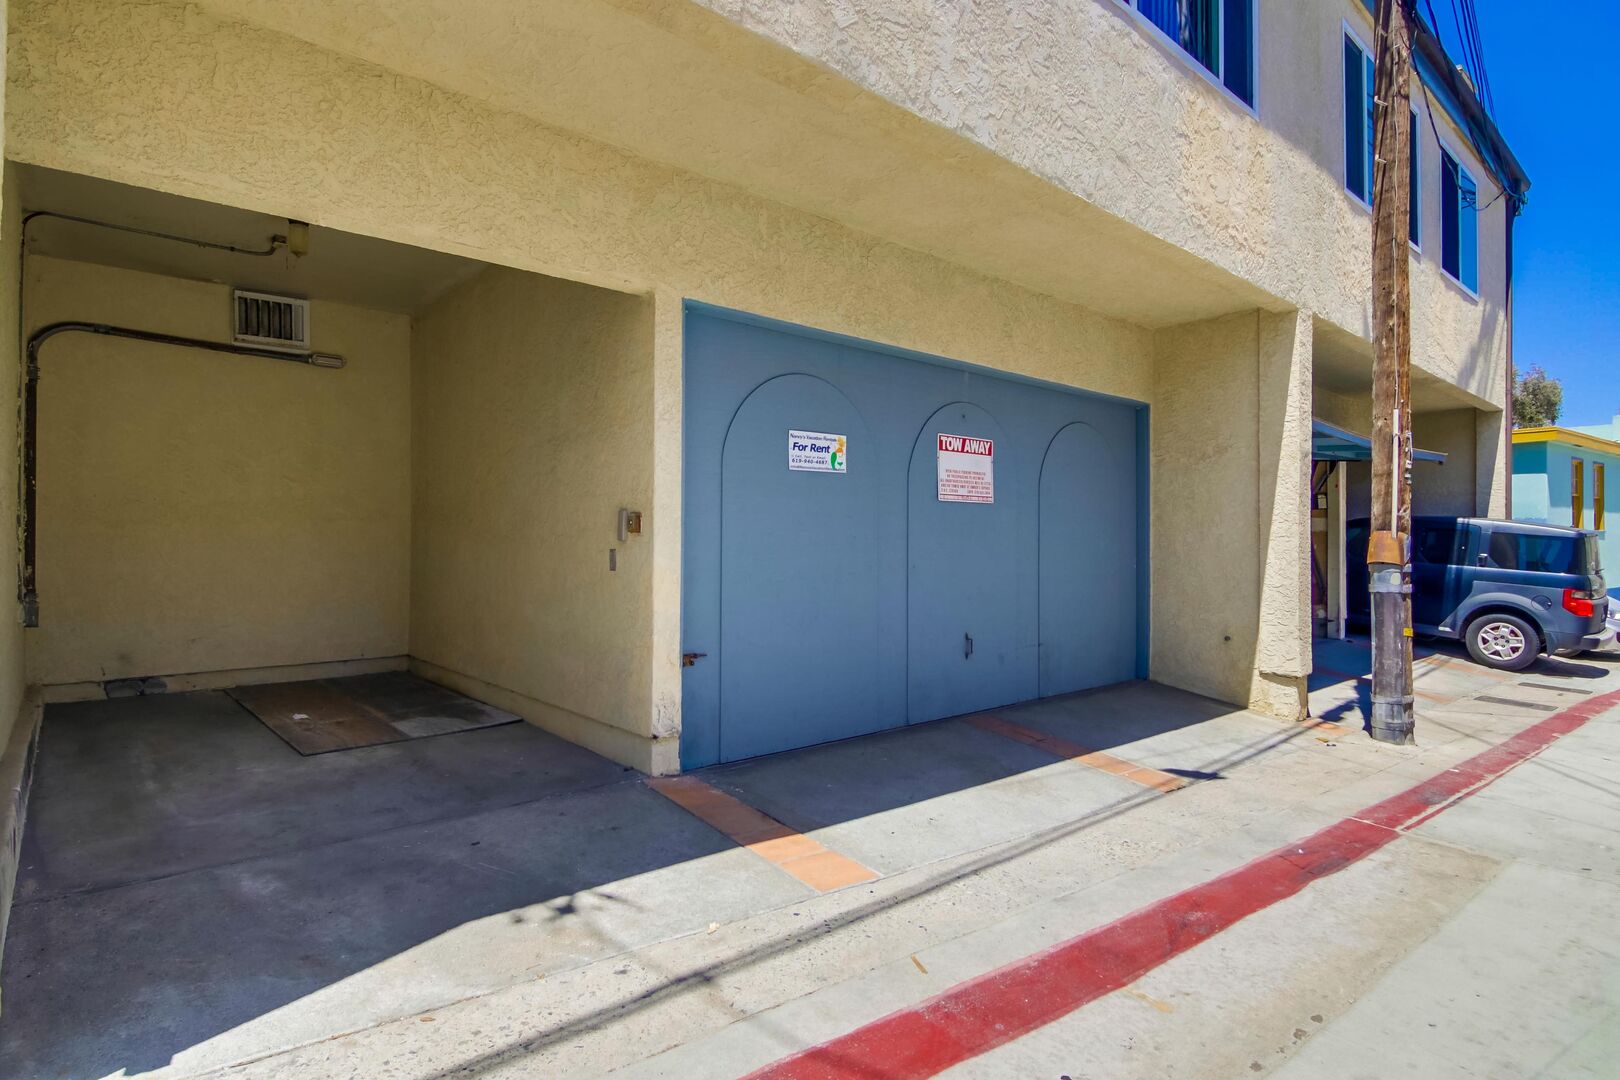 Compact vehicle parking space to the left of garage, first come first serve